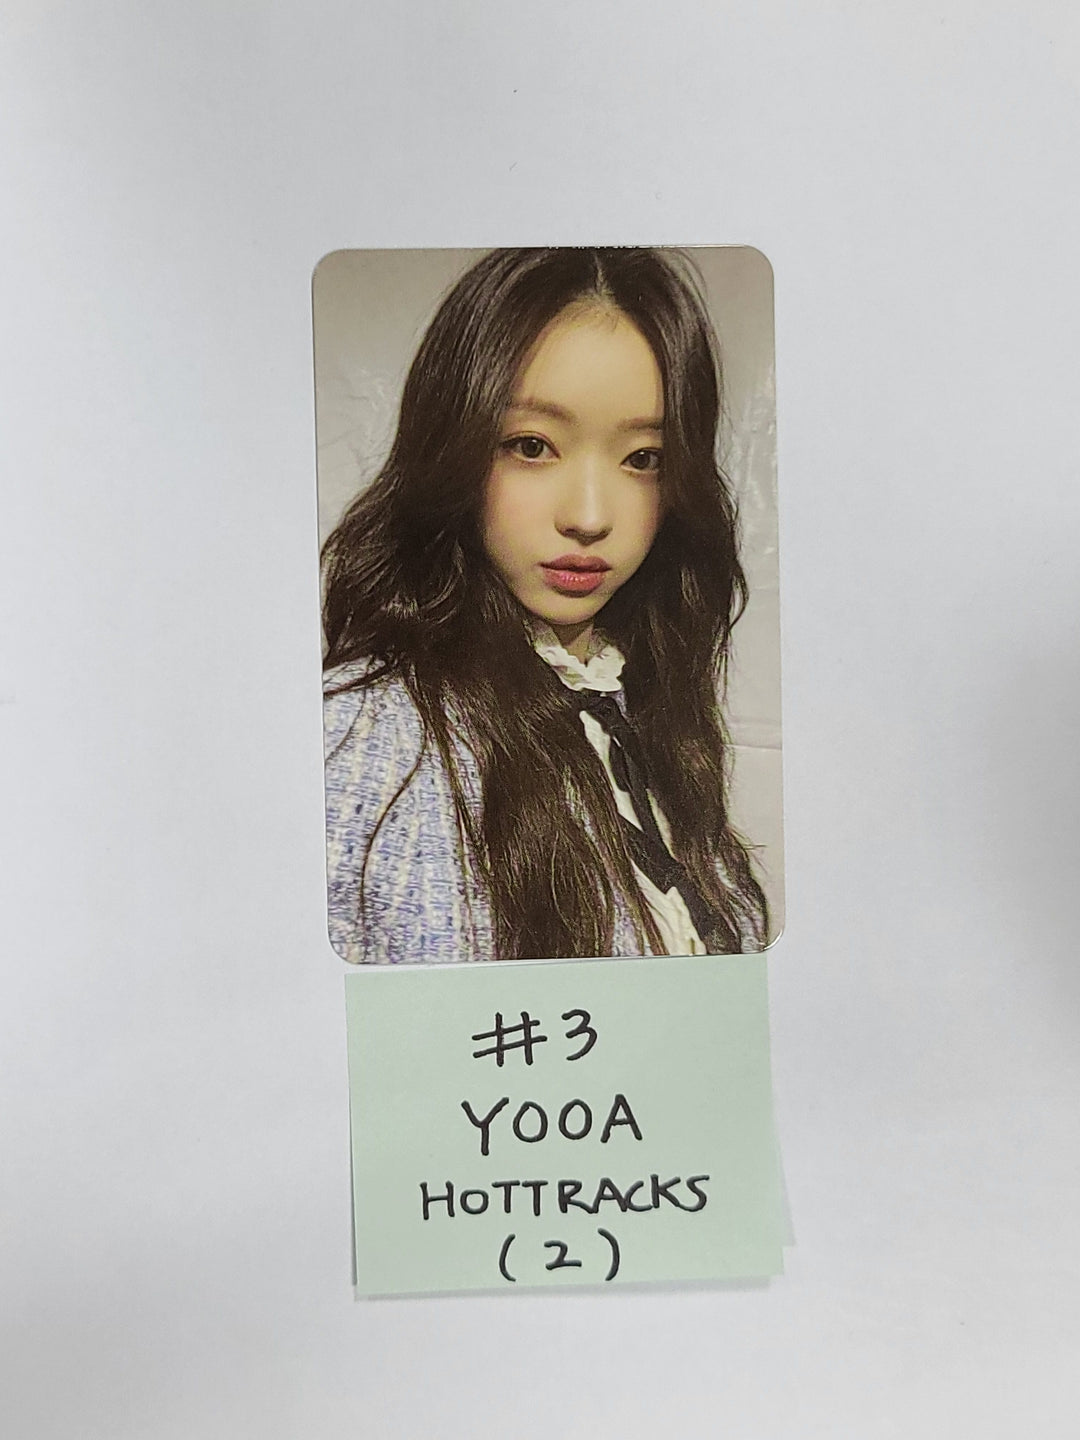 Oh My Girl 'Real Love' - Hottracks Pre-Order Benefit Photocard